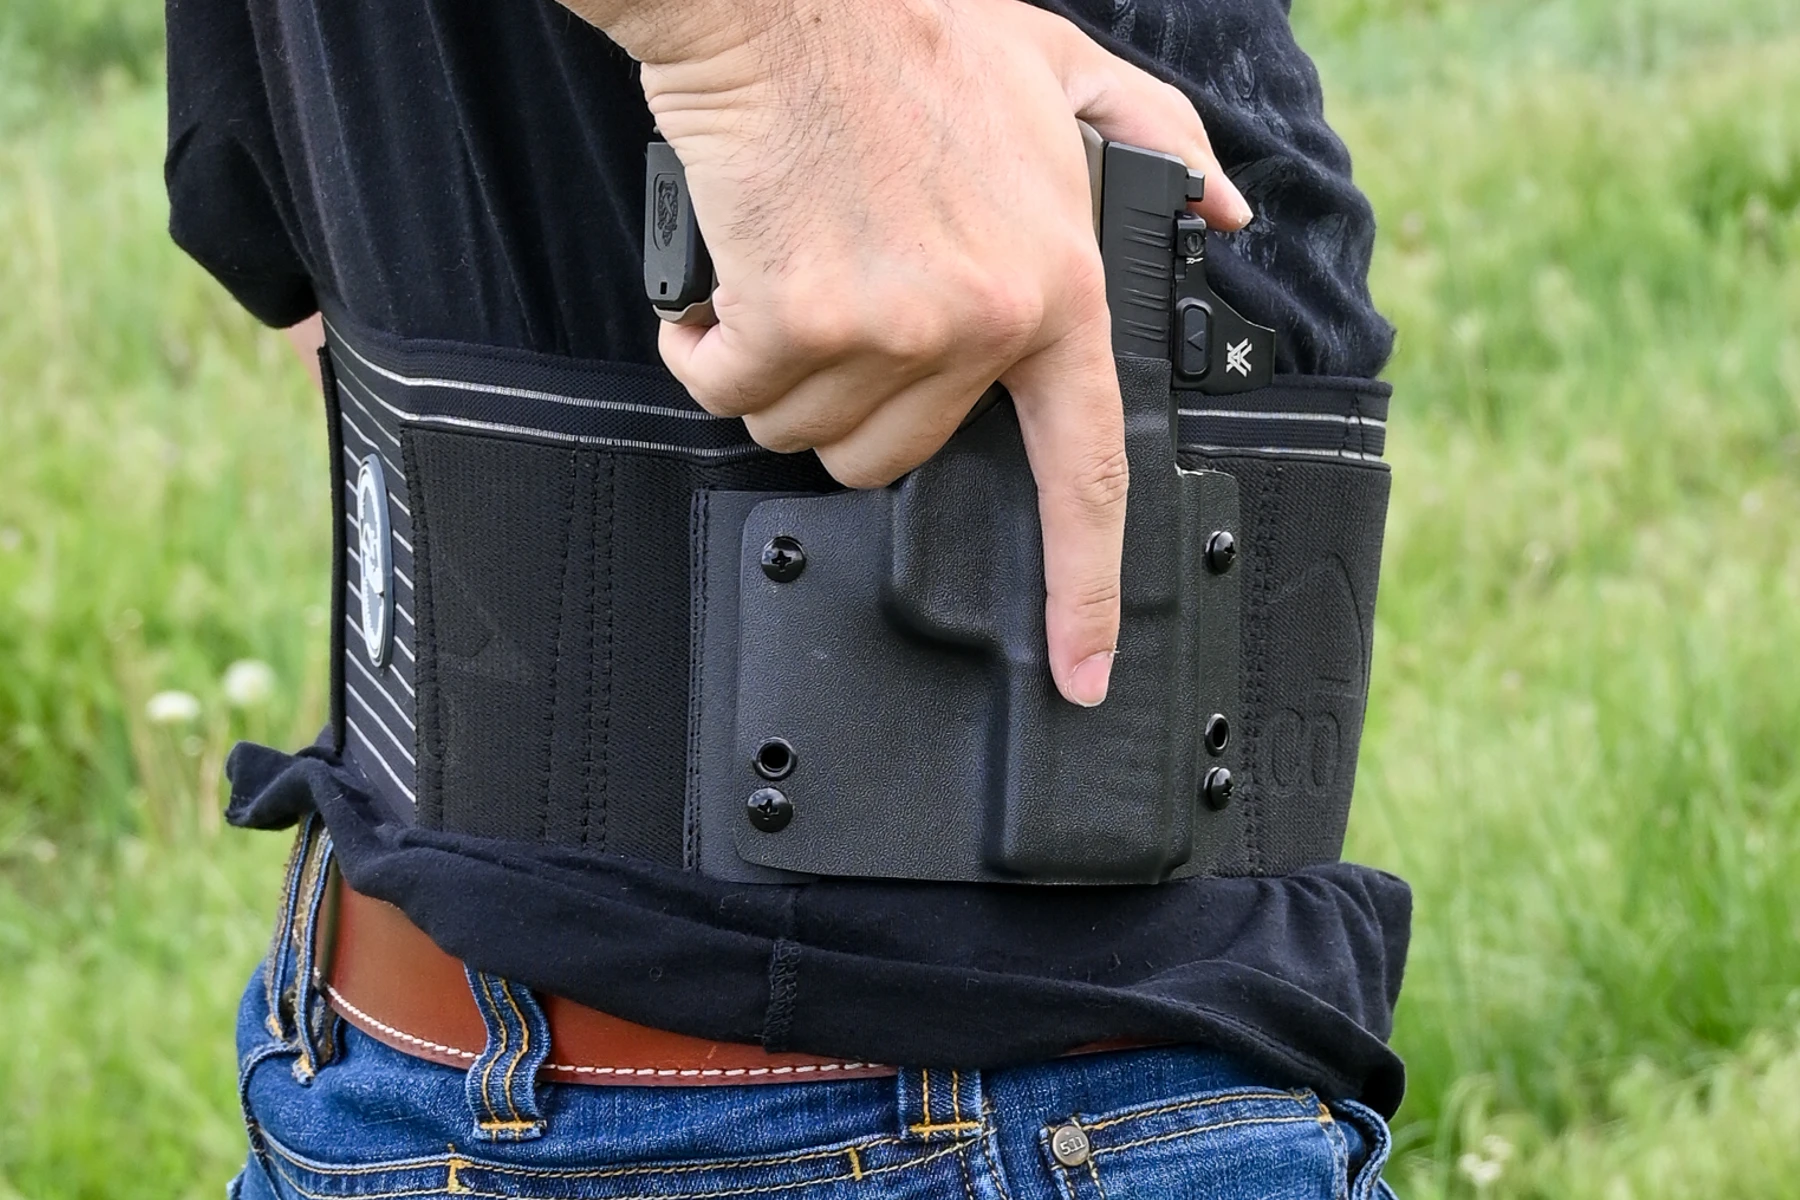 Belly band ccw for guns with optics